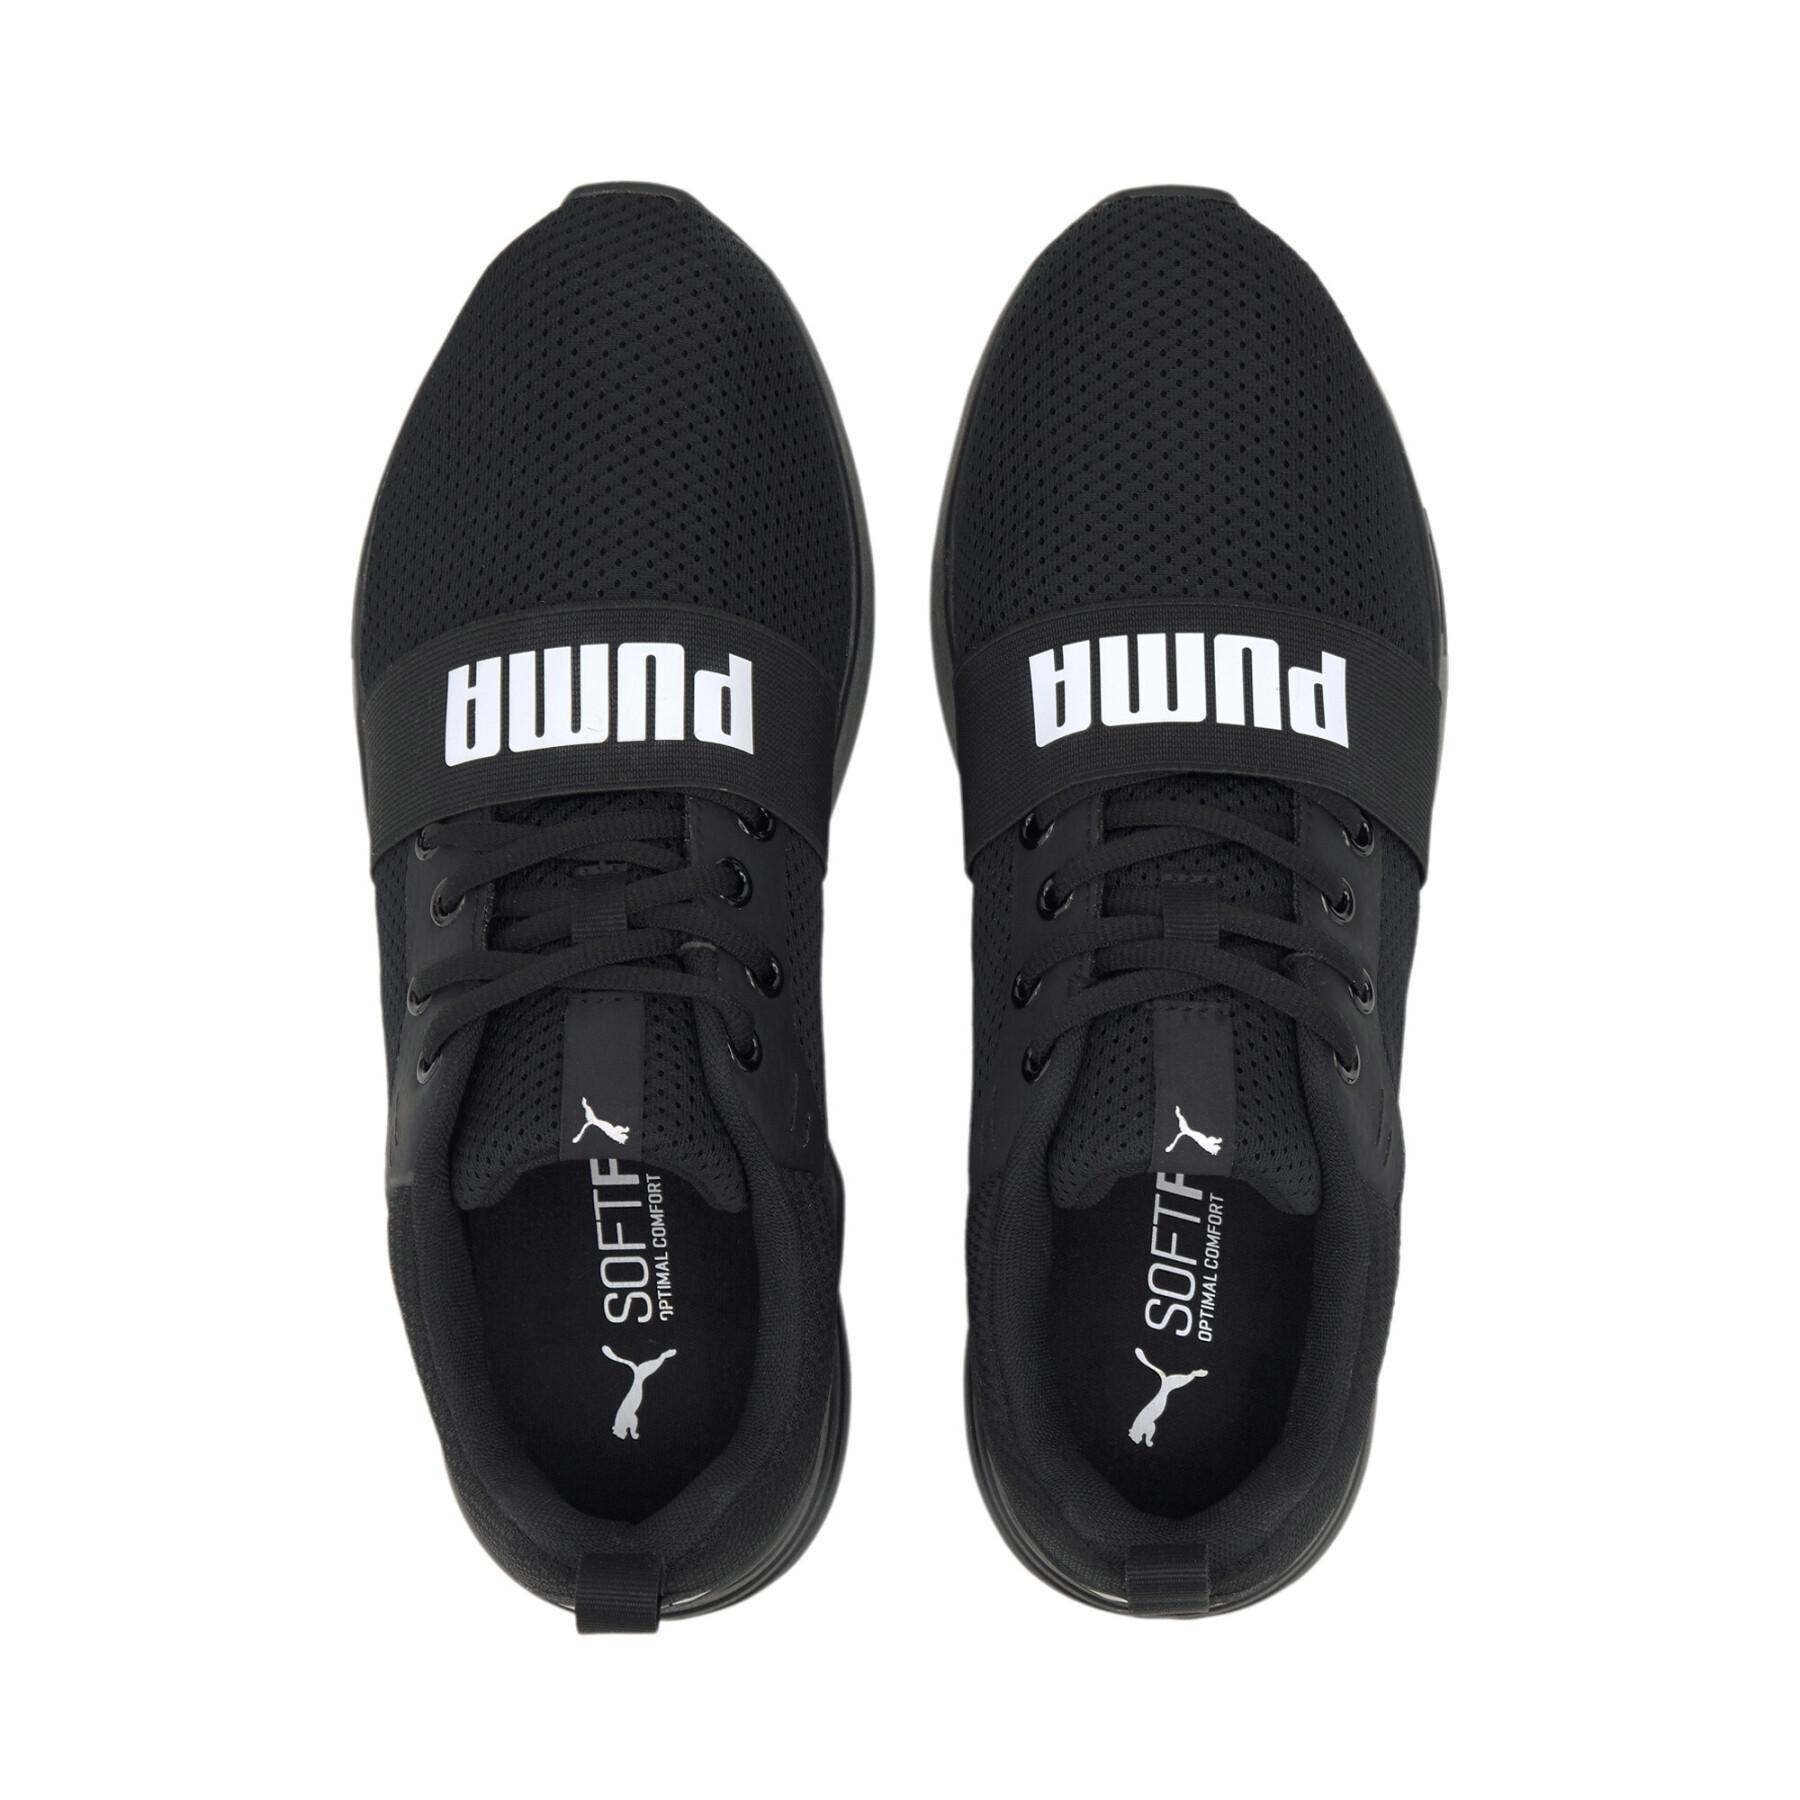 Formadores Puma Wired Run